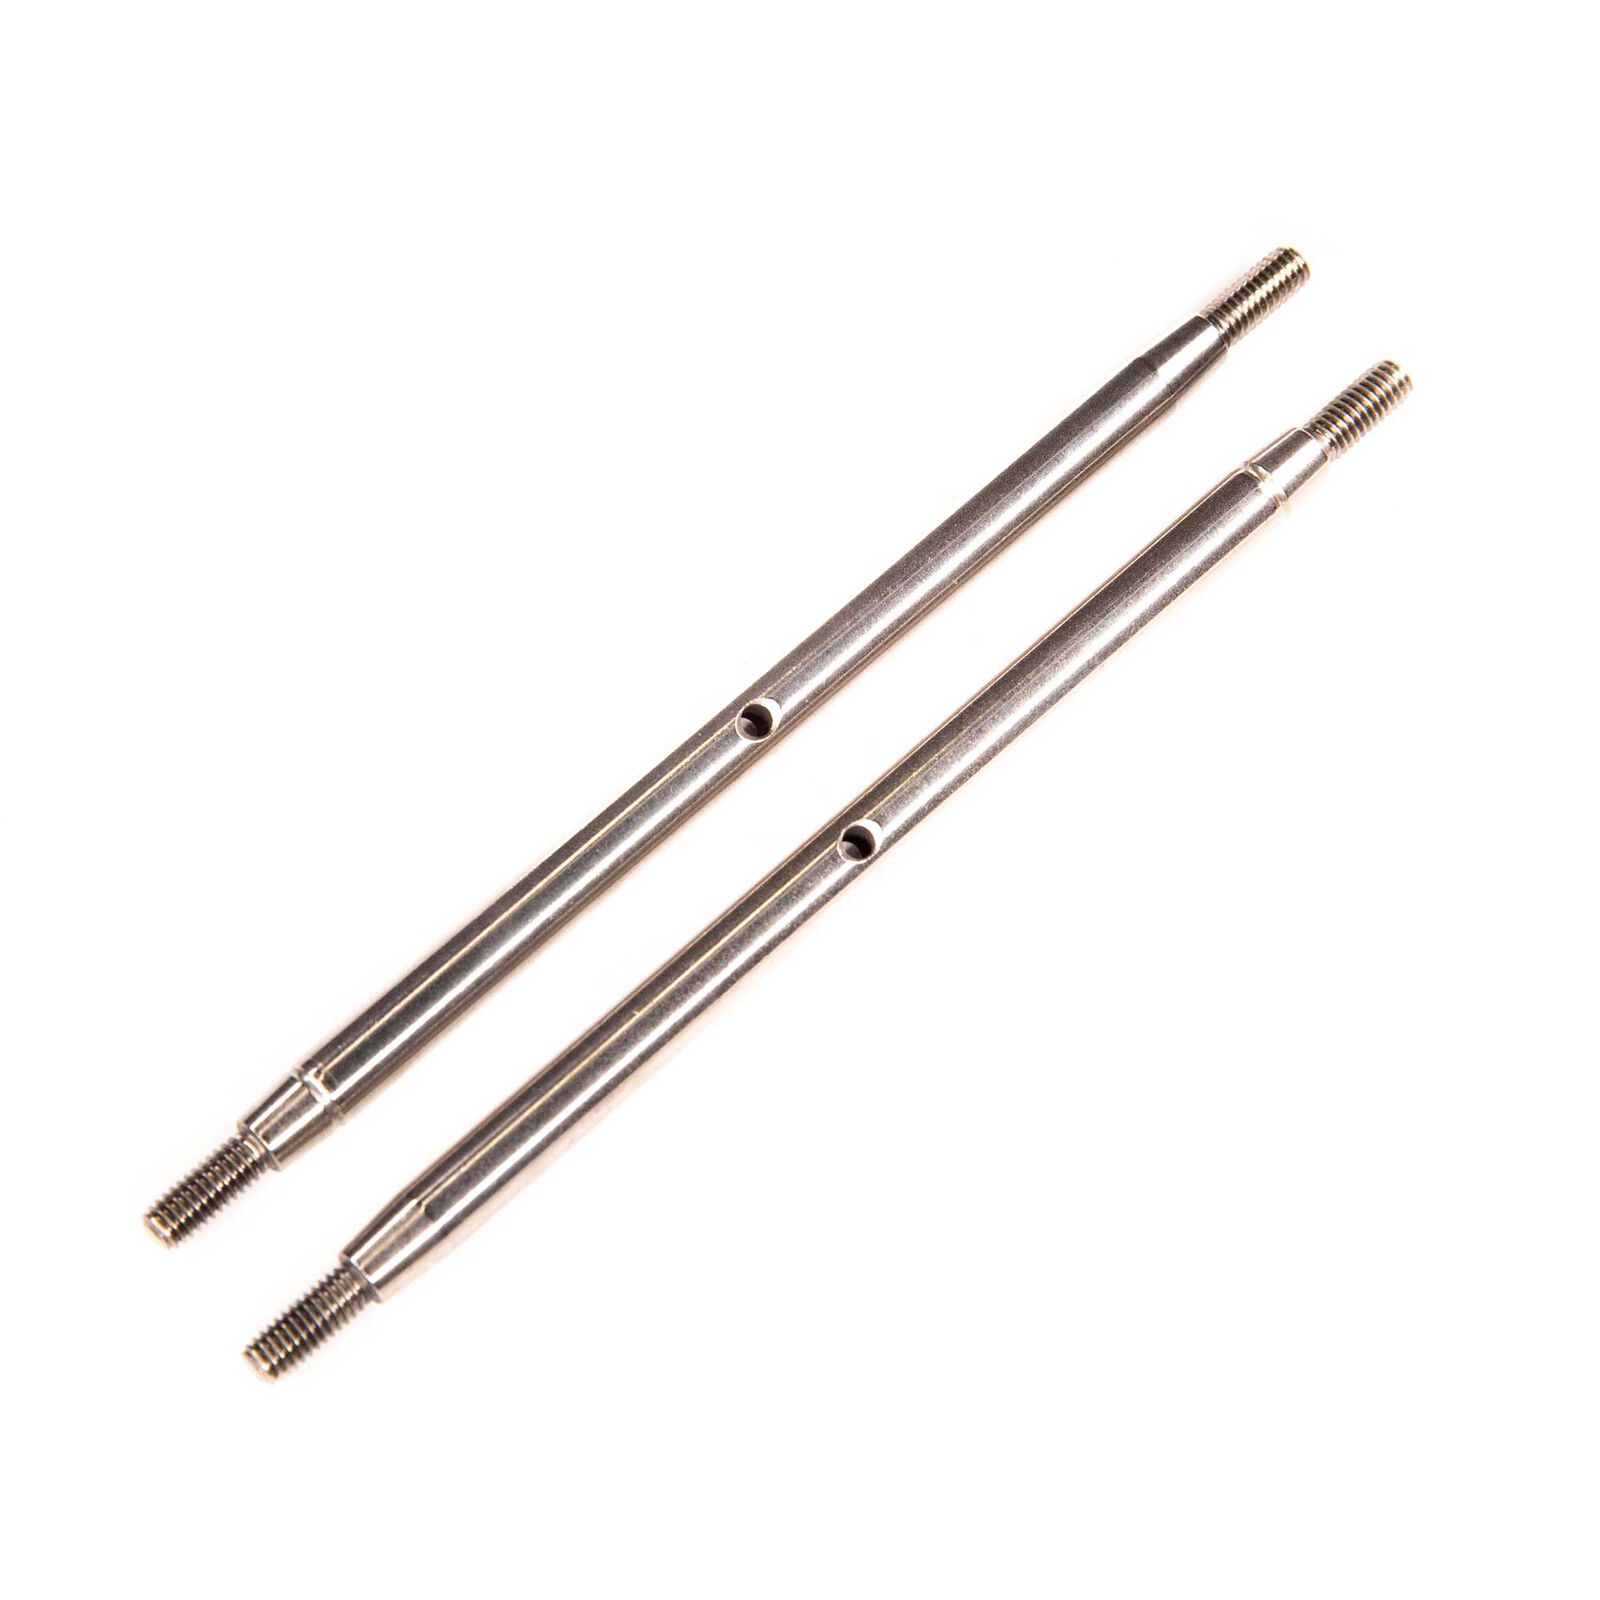 AXIAL Stainless Steel M6x 117mm Link (2): SCX10 III